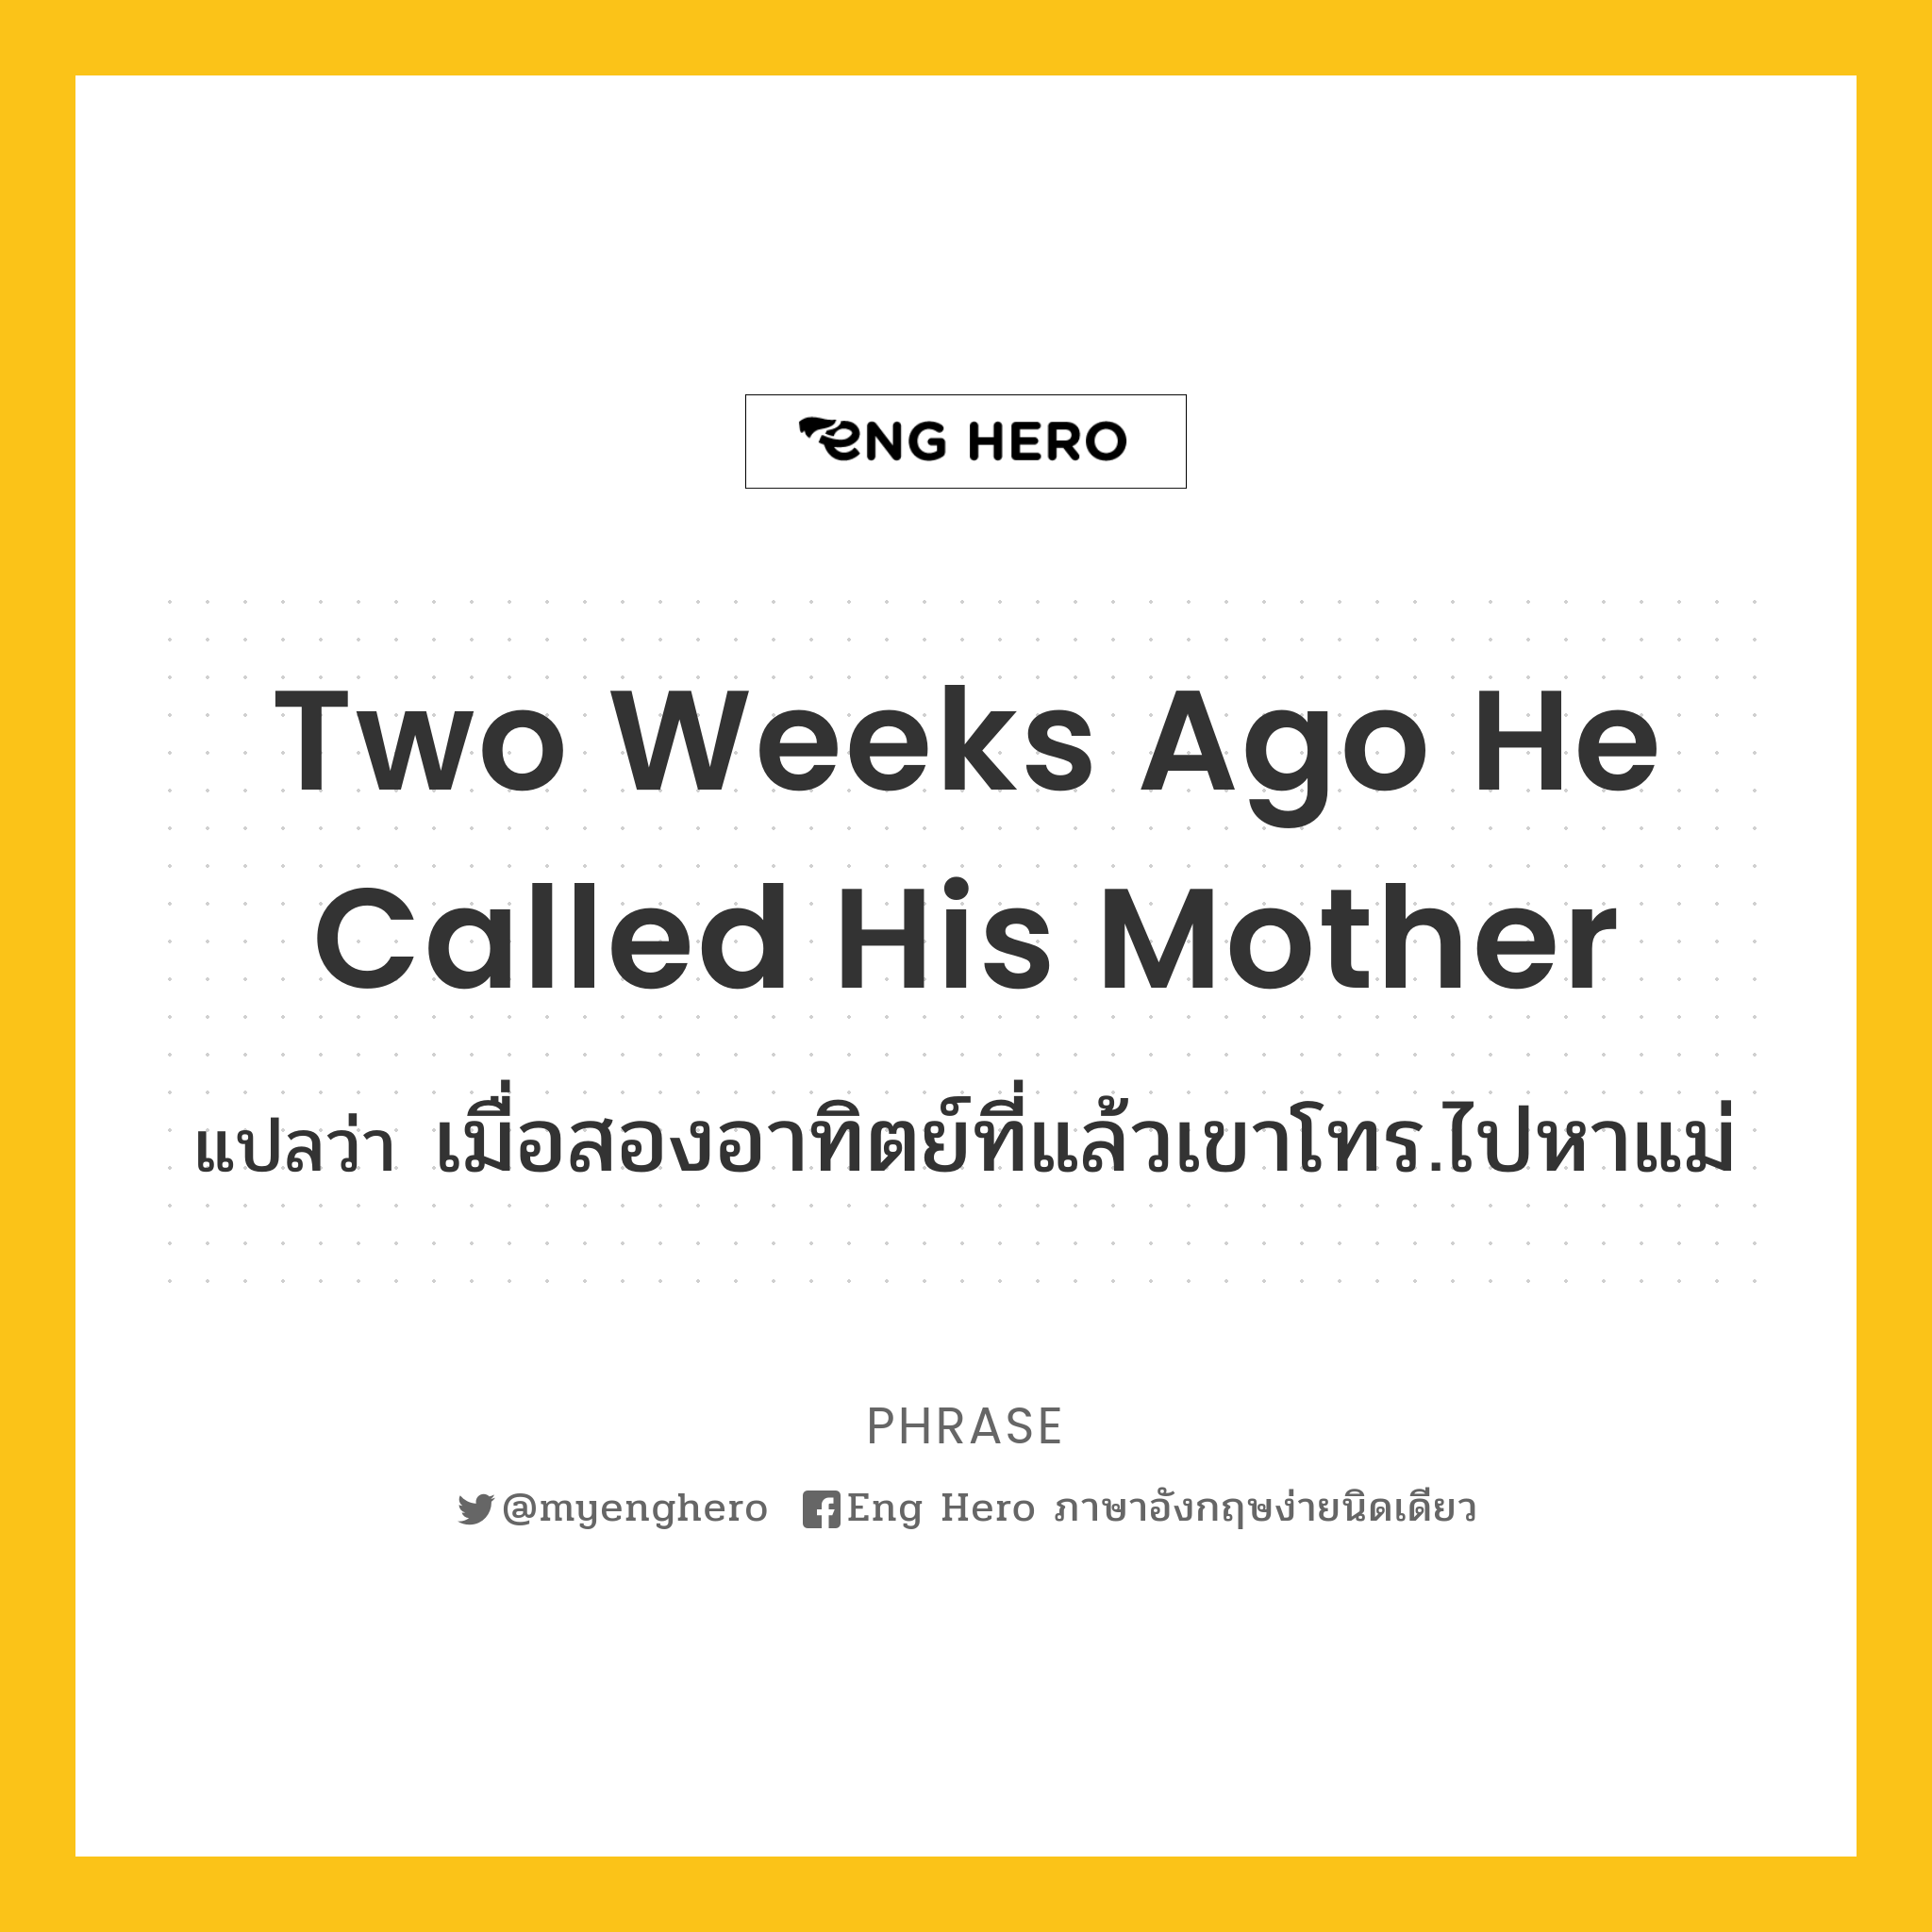 Two weeks ago he called his mother